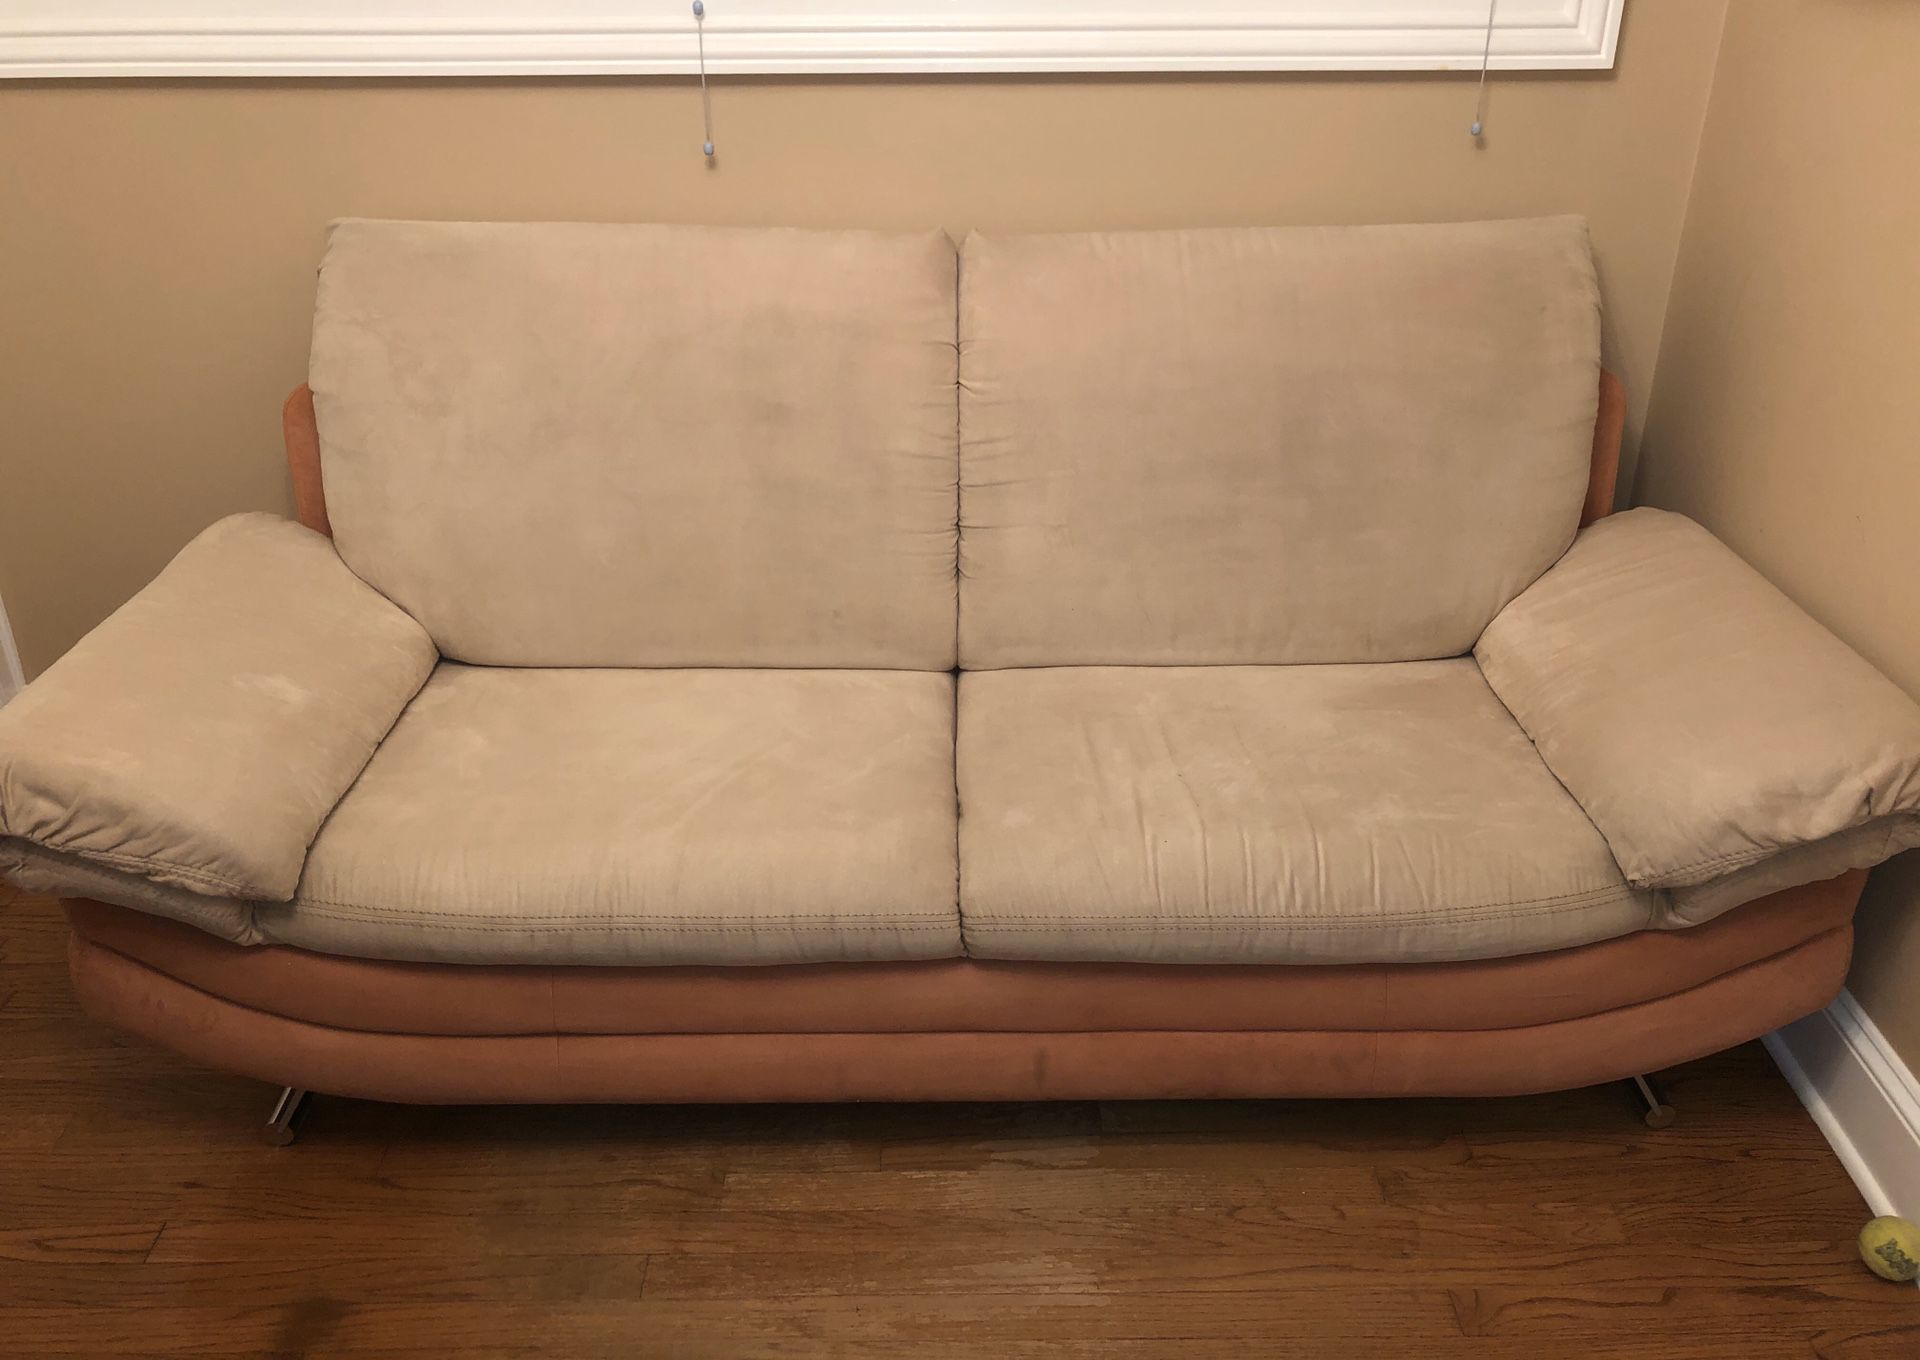 Selling 3 Piece Couch Set